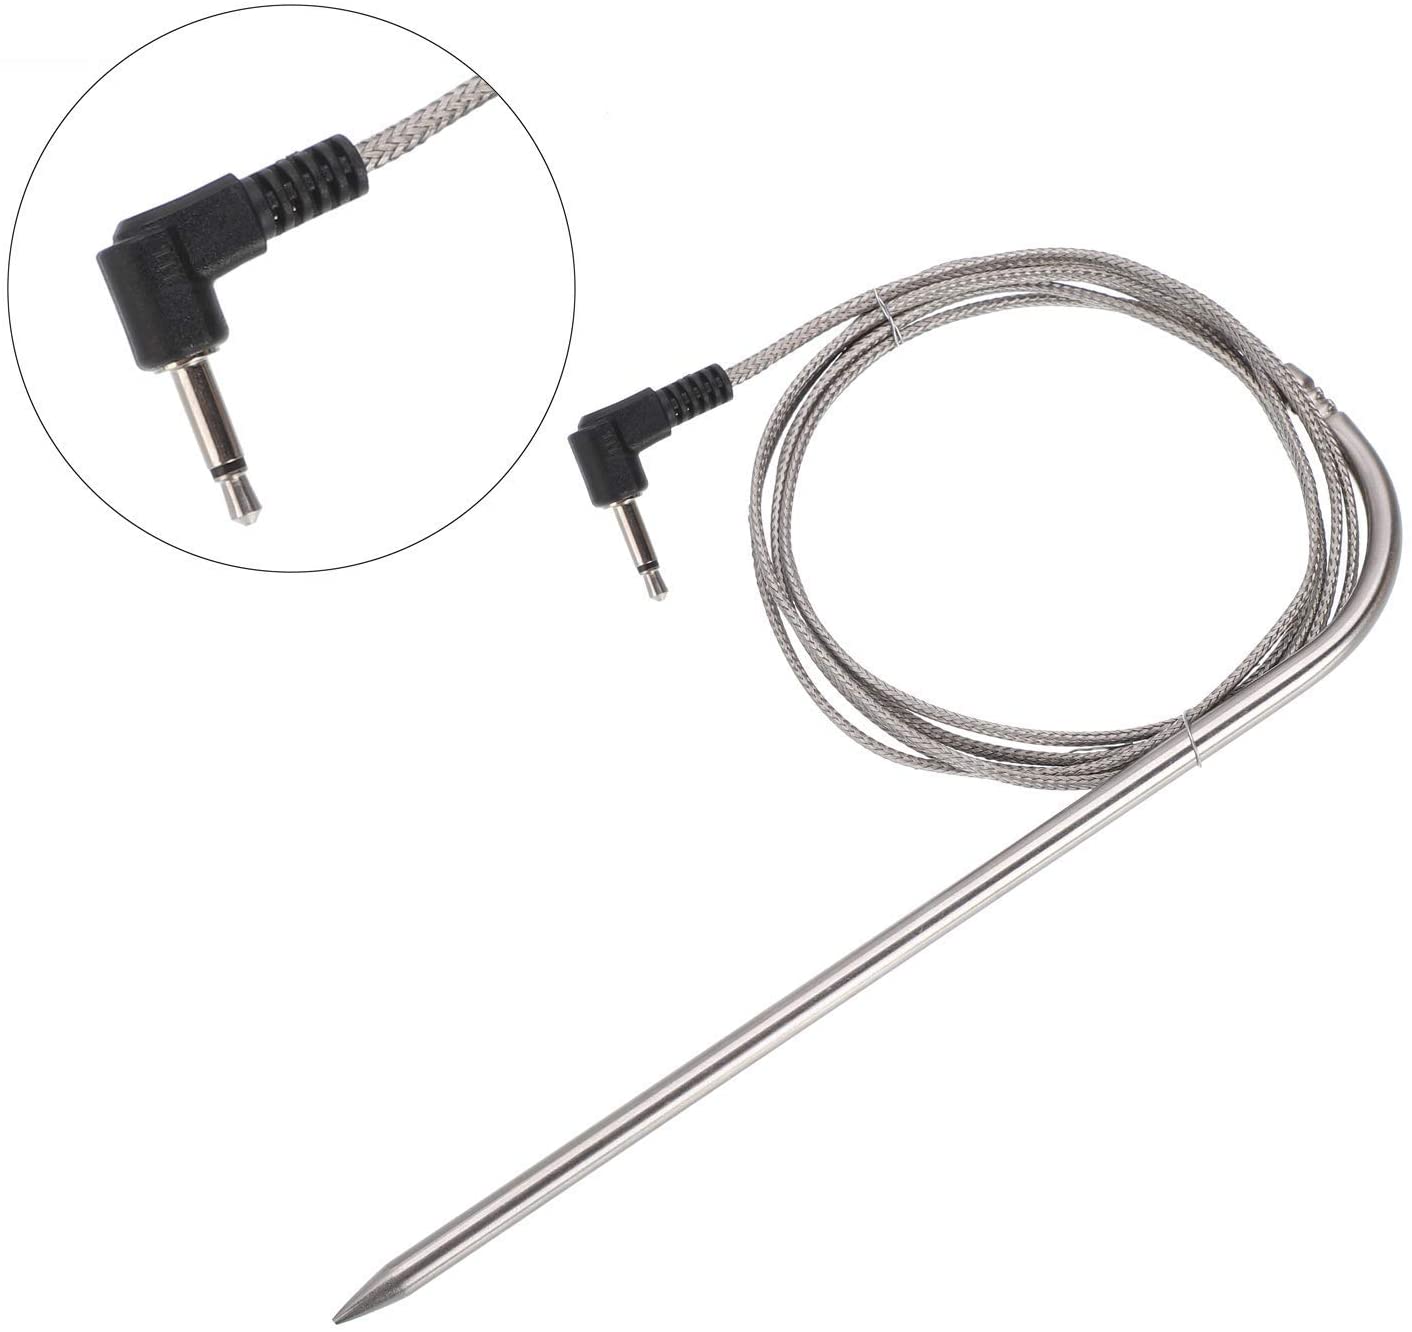 2 Pcs Replacement Waterproof Meat Probe Compatible for Traeger BBQ Grills  3.5 mm Plug Meat BBQ Digital Thermostat Probes 